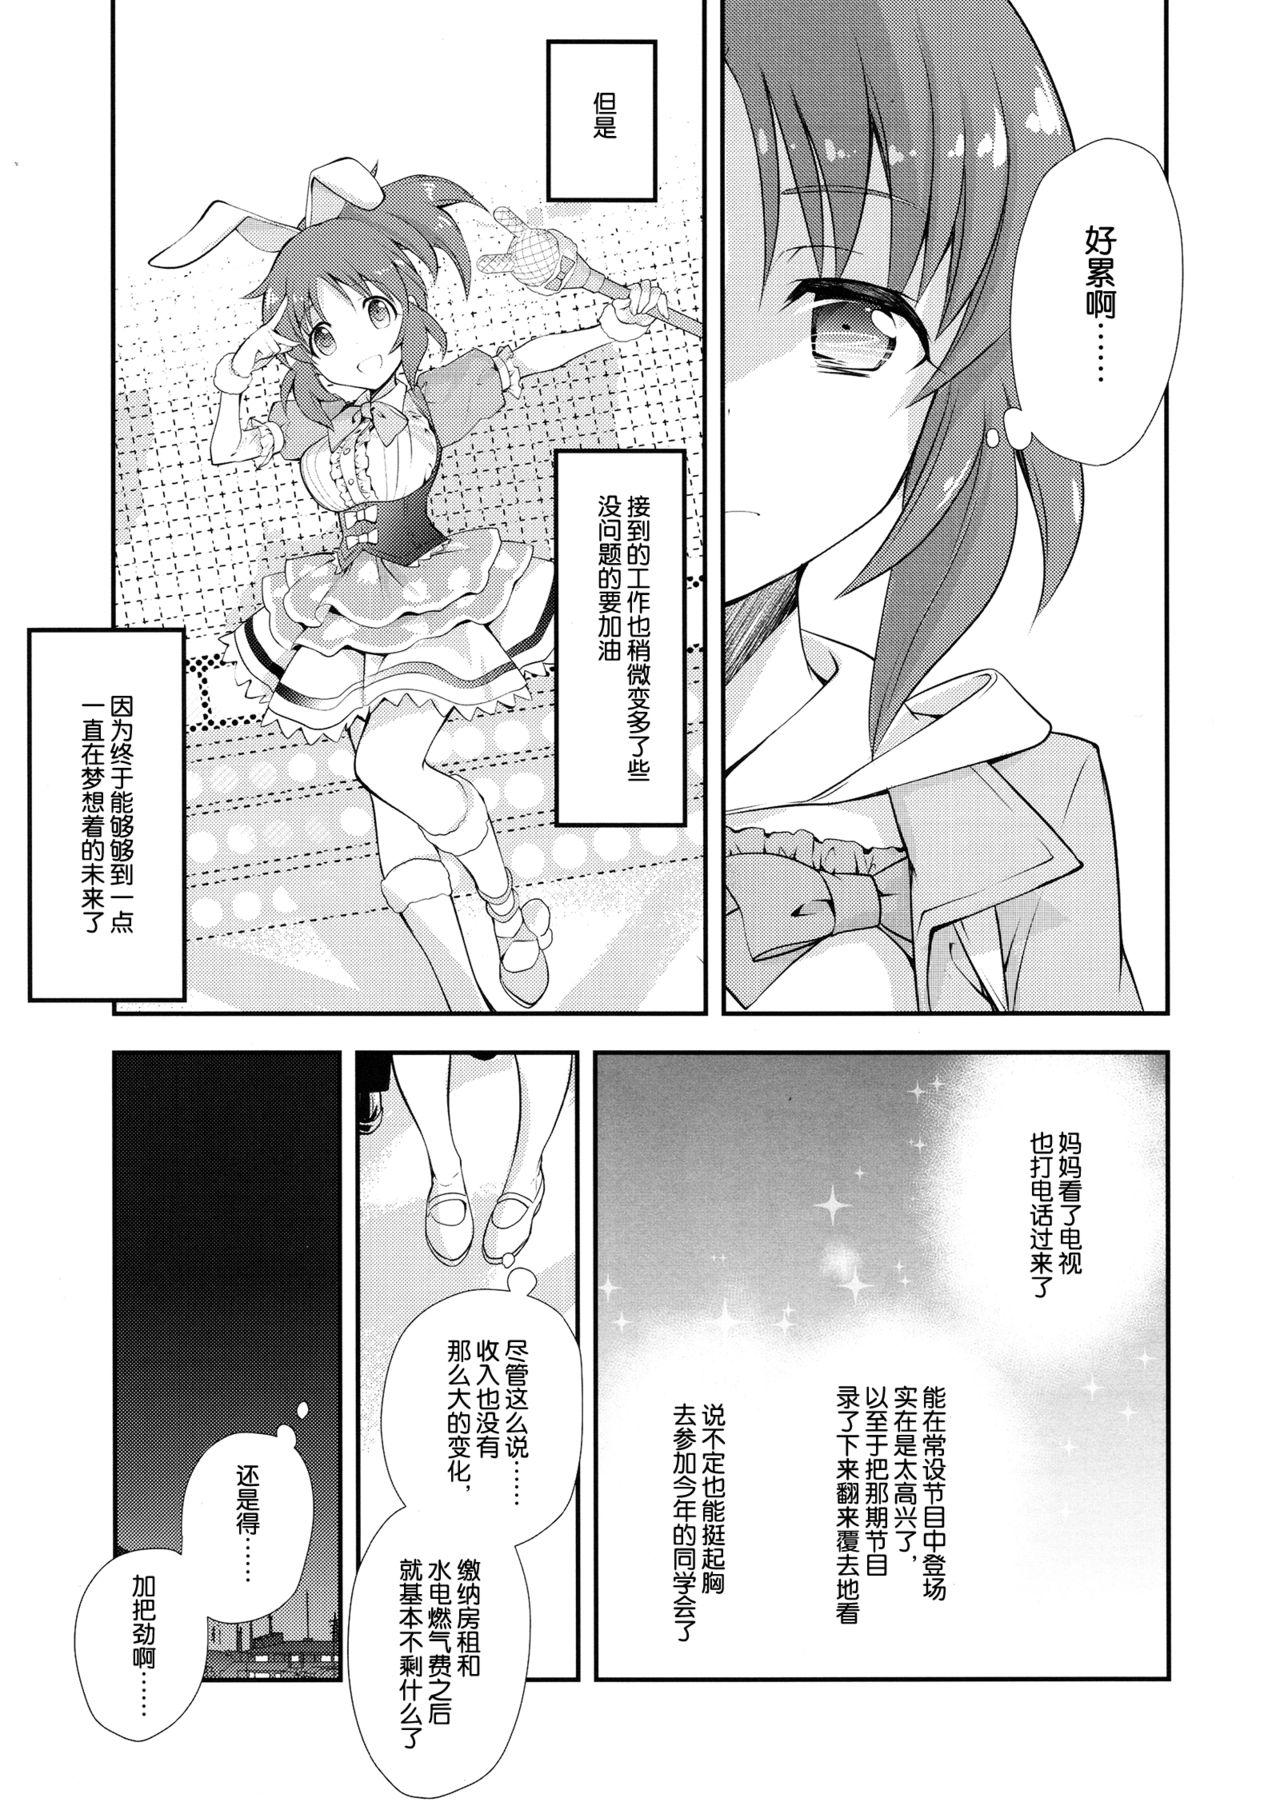 Celebrities USAMIN NO-LOAD - The idolmaster Oriental - Page 6